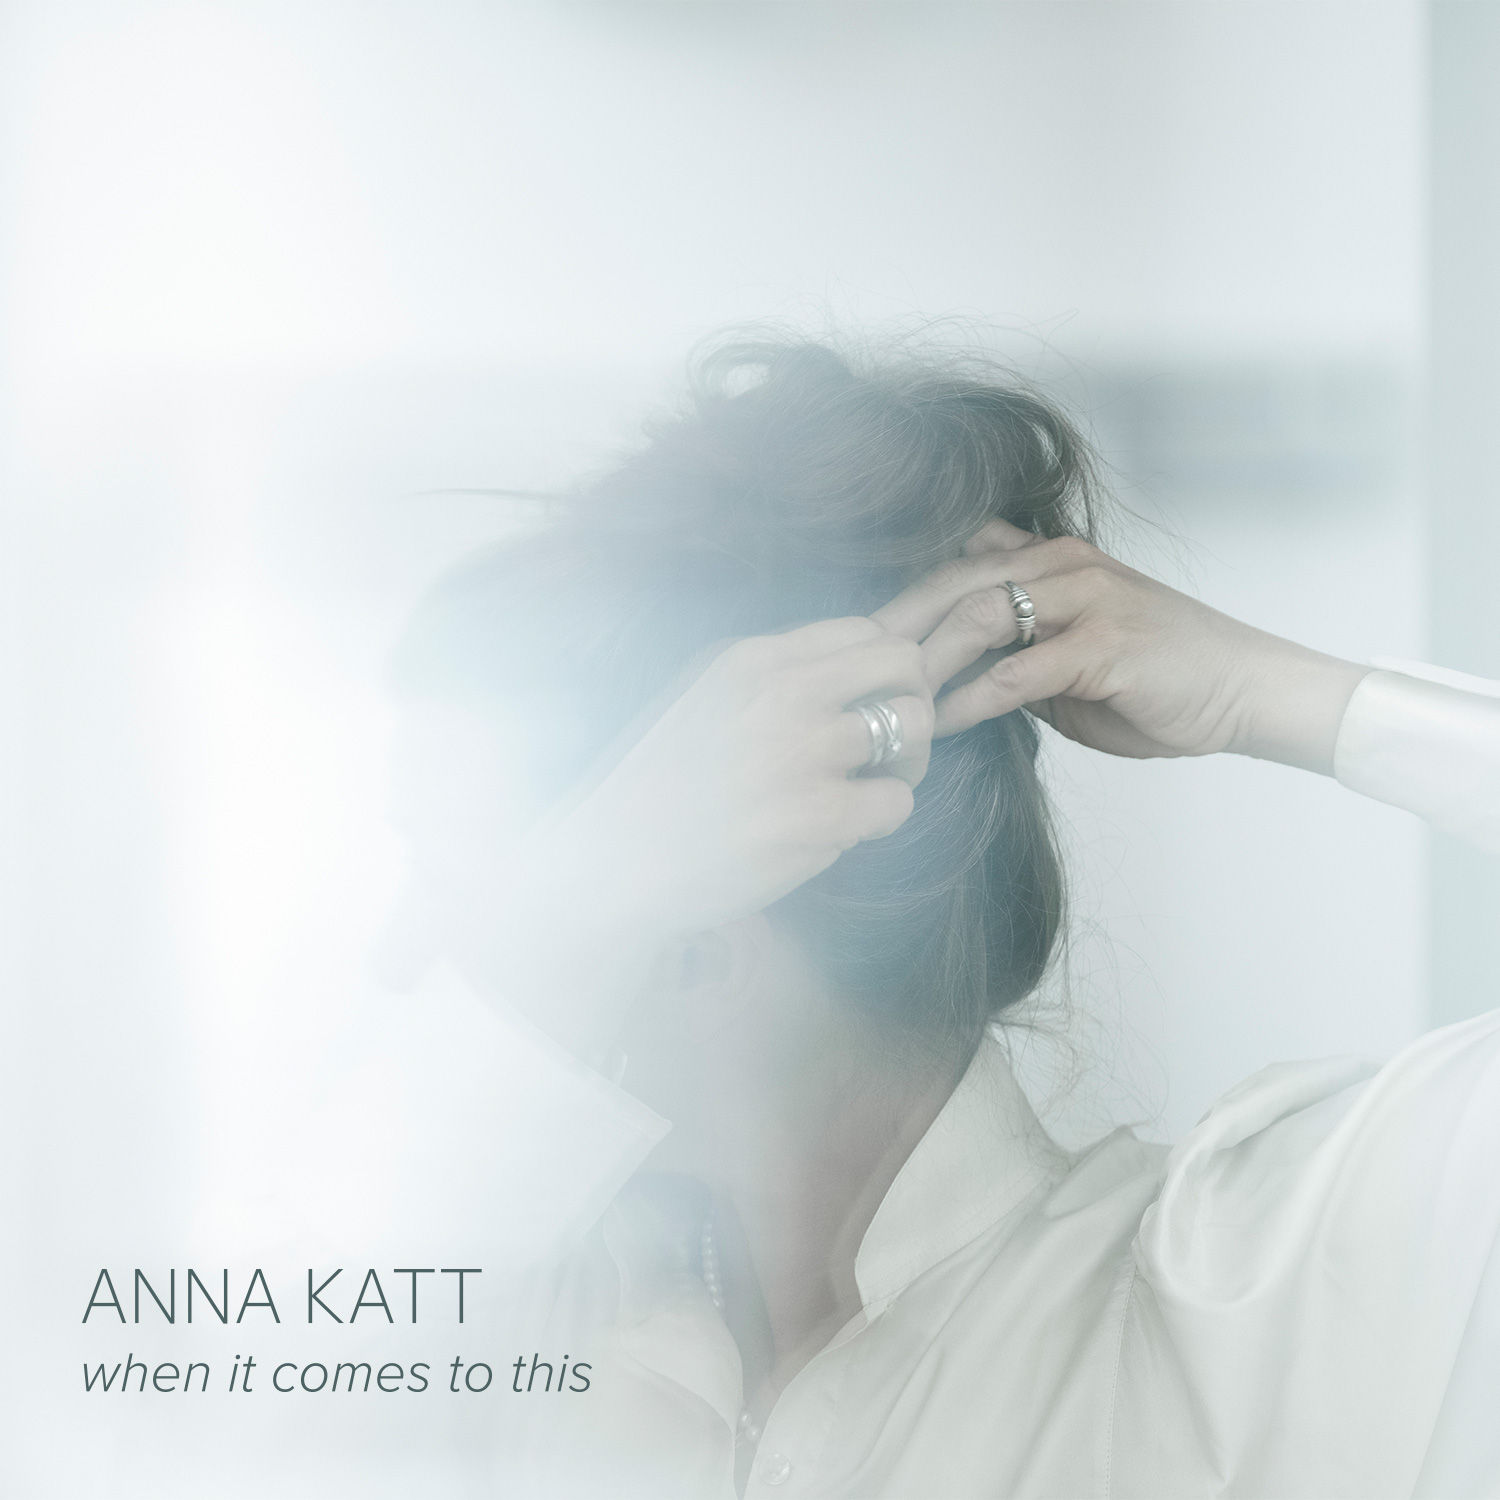 Anna Katt - When it comes to this